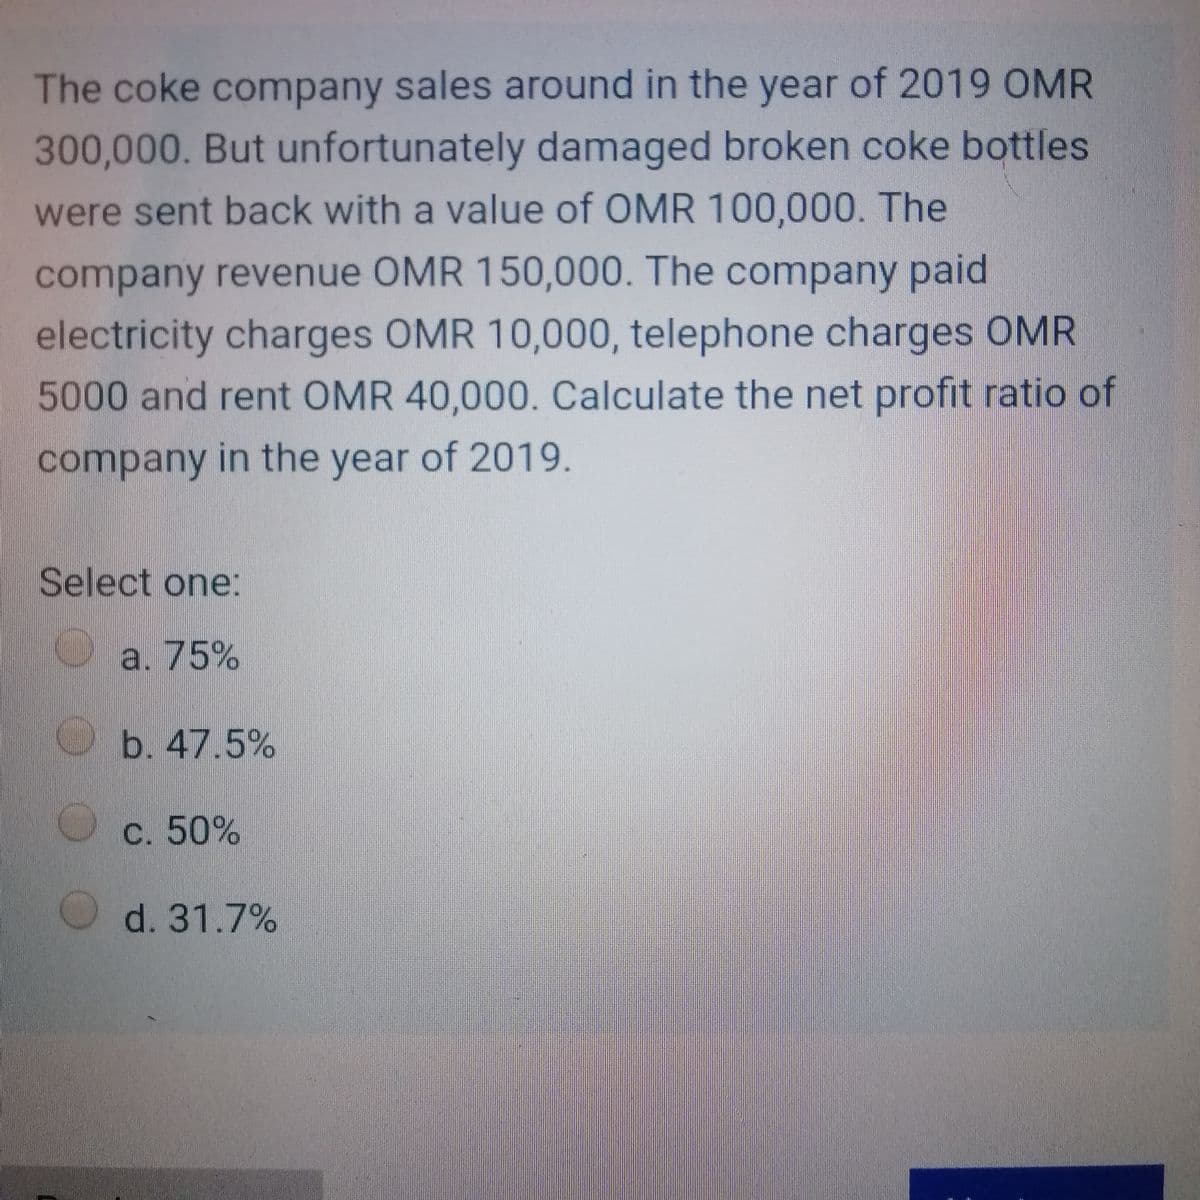 The coke company sales around in the year of 2019 OMR
300,000. But unfortunately damaged broken coke bottles
were sent back with a value of OMR 100,000. The
company revenue OMR 150,000. The company paid
electricity charges OMR 10,000, telephone charges OMR
5000and rent OMR 40,000. Calculate the net profit ratio of
company in the year of 2019.
Select one:
a. 75%
b. 47.5%
С. 50%
O d. 31.7%
